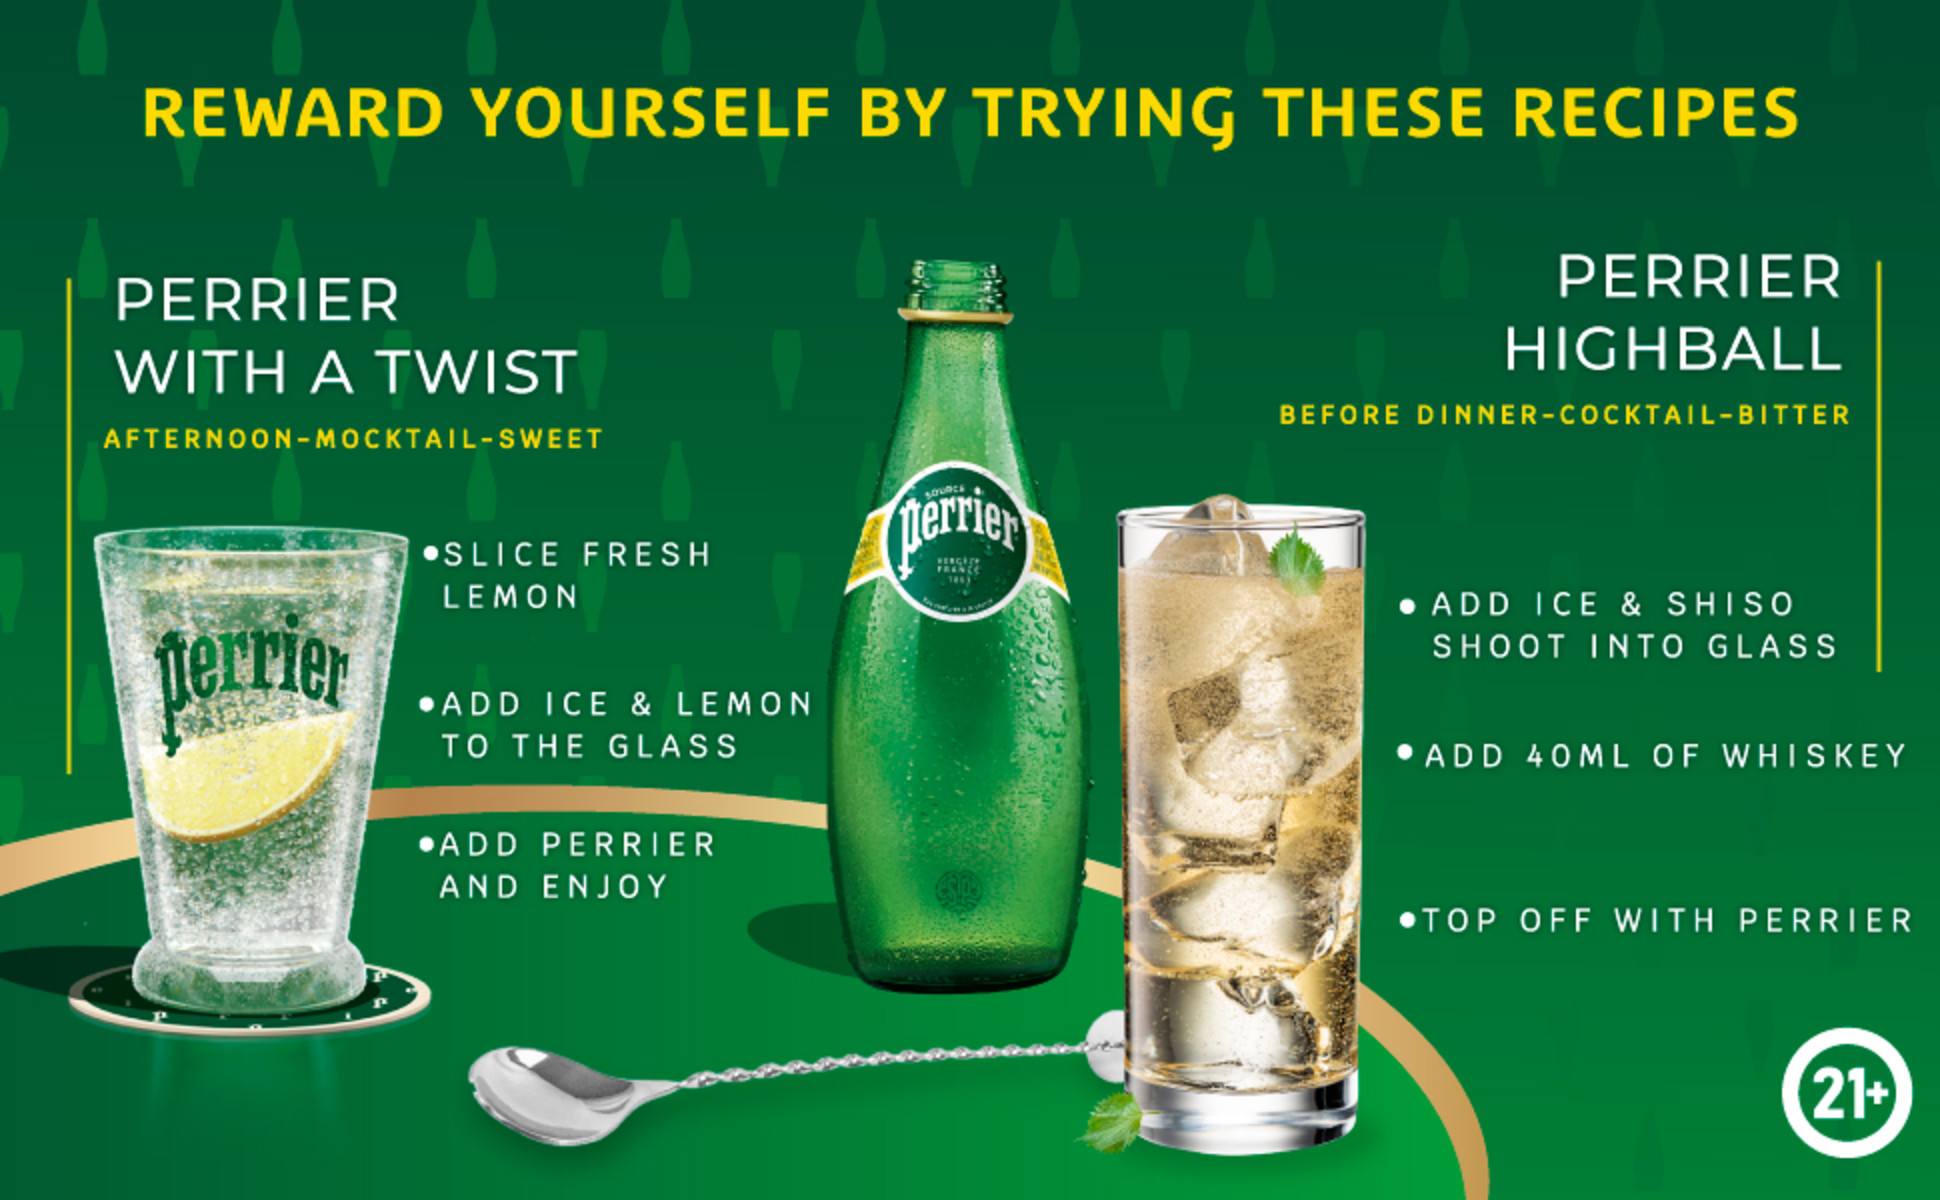 Perrier with a twist mocktail recipe and highball recipe